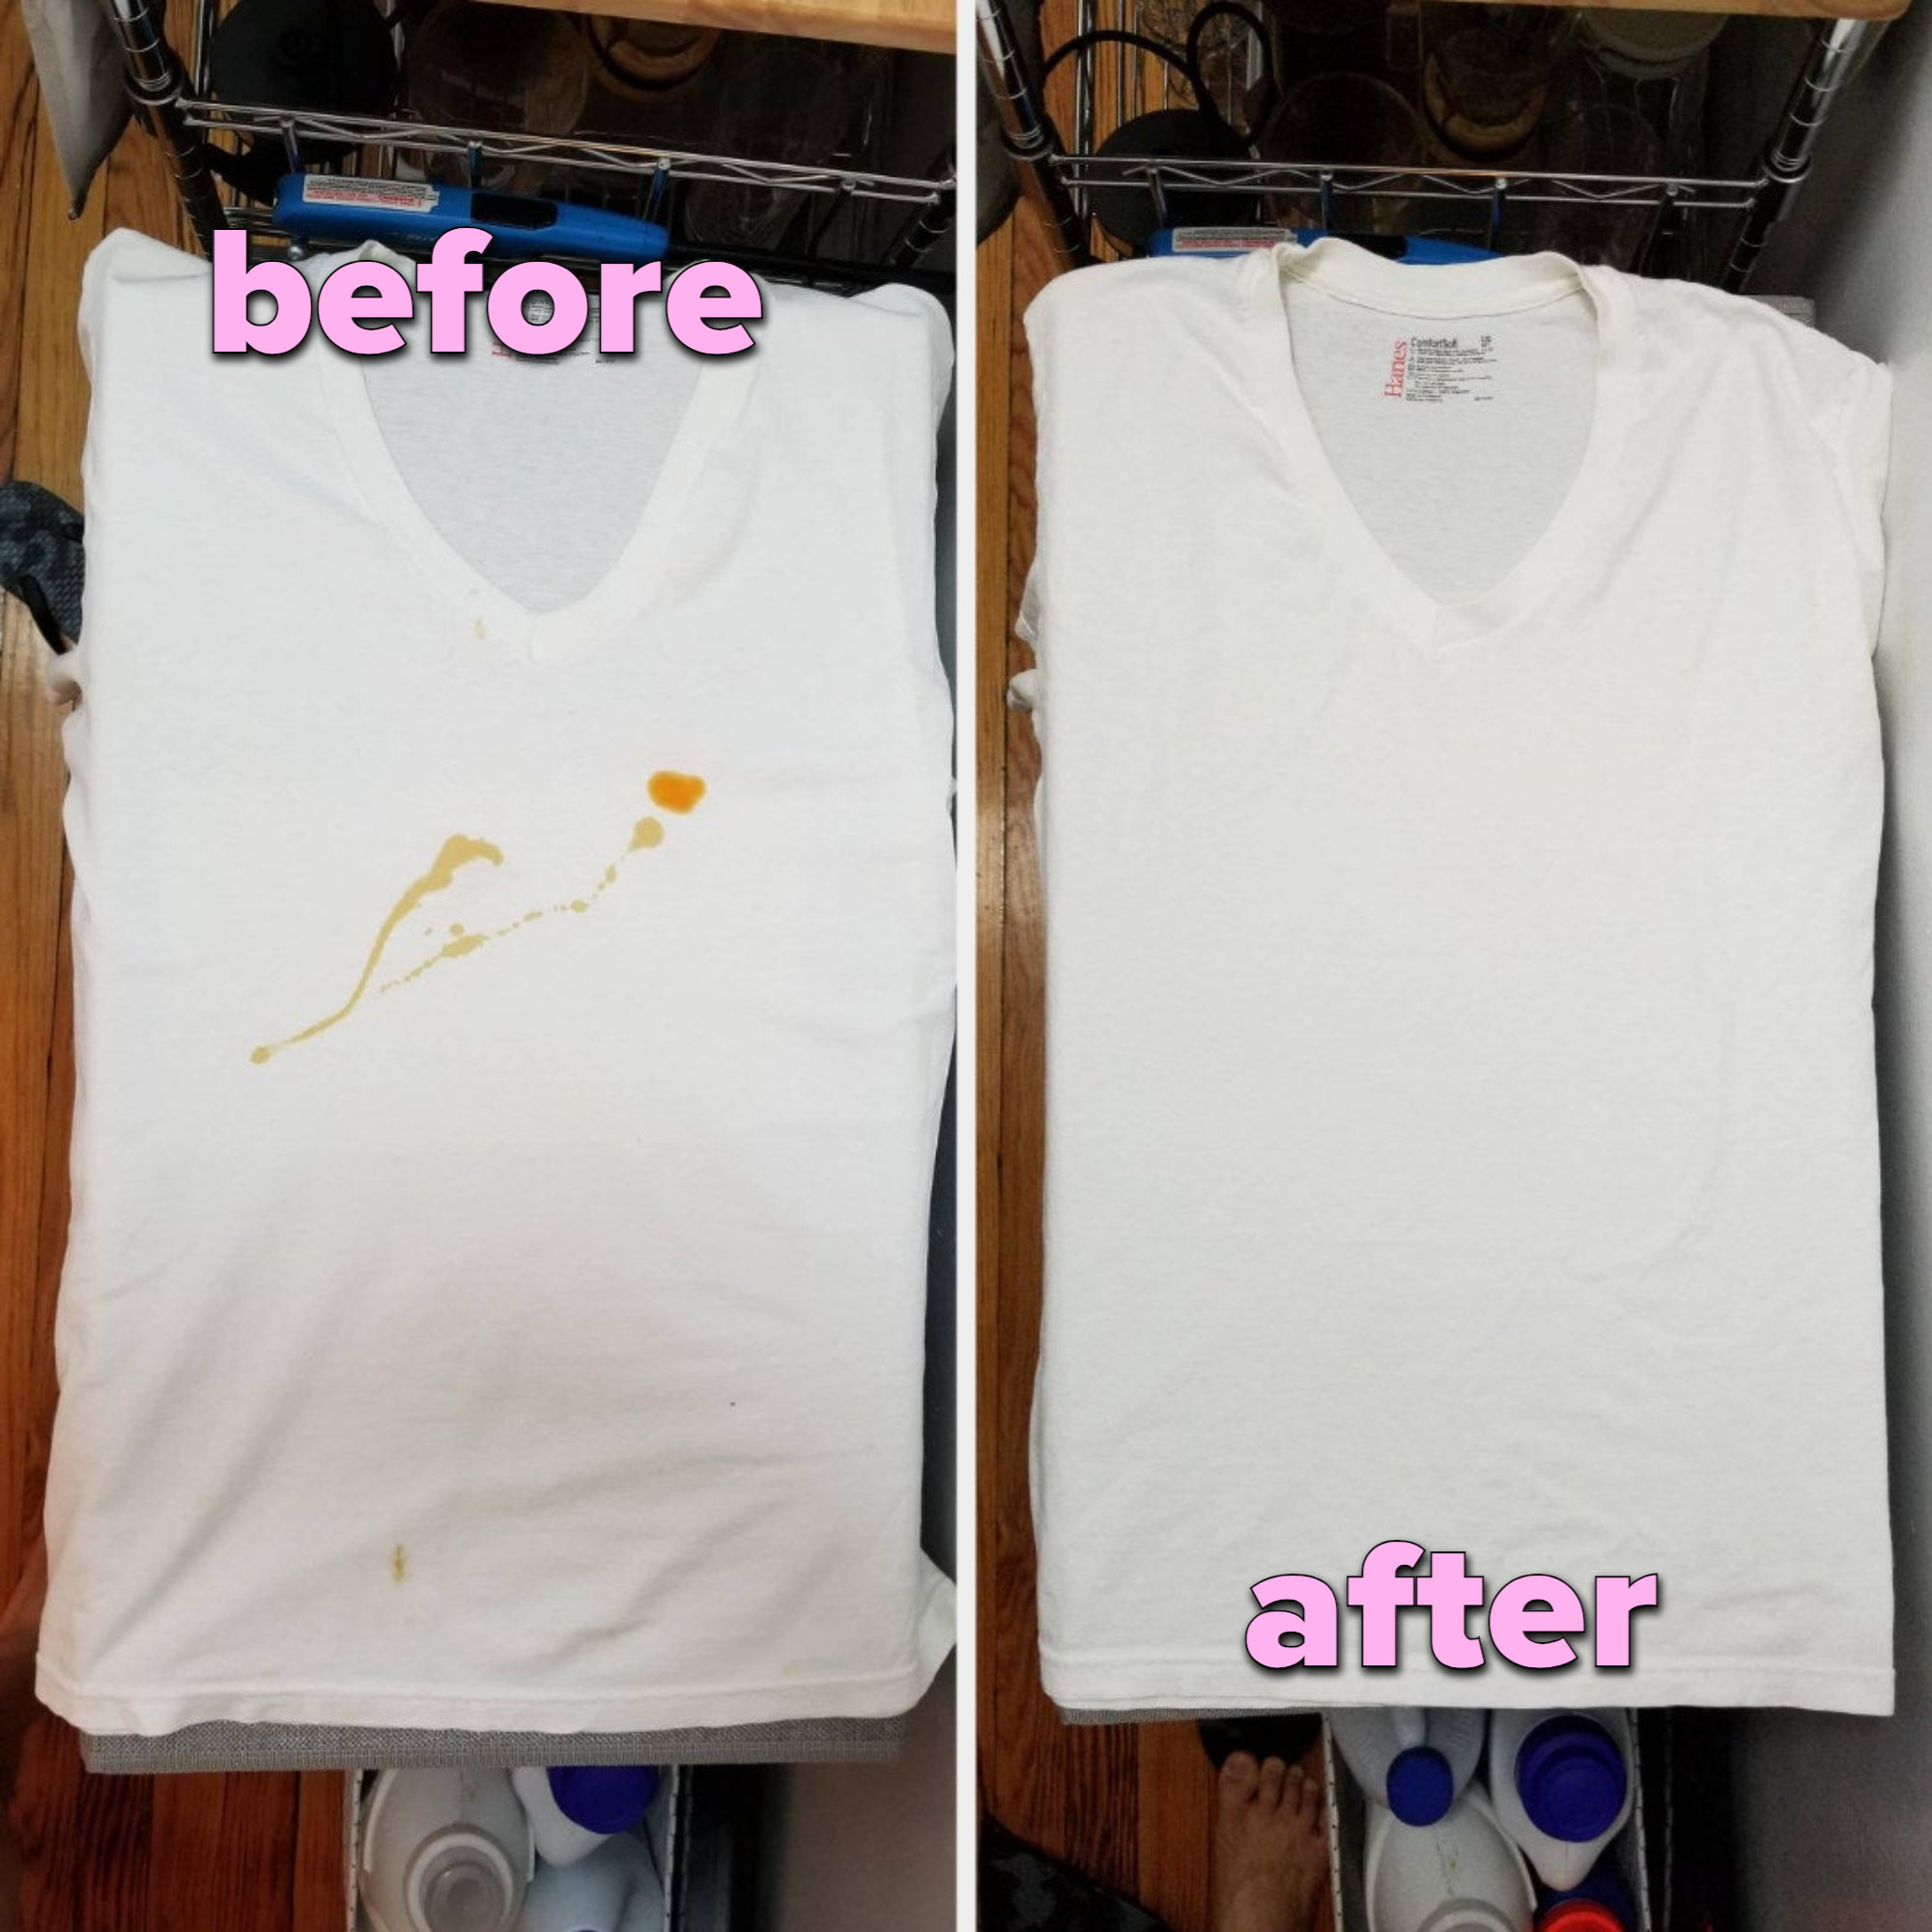 a before photo of a white shirt with ponzu sauce and hot sesame oil spilled on it and an after photo of the white shirt that looks brand new with no stain